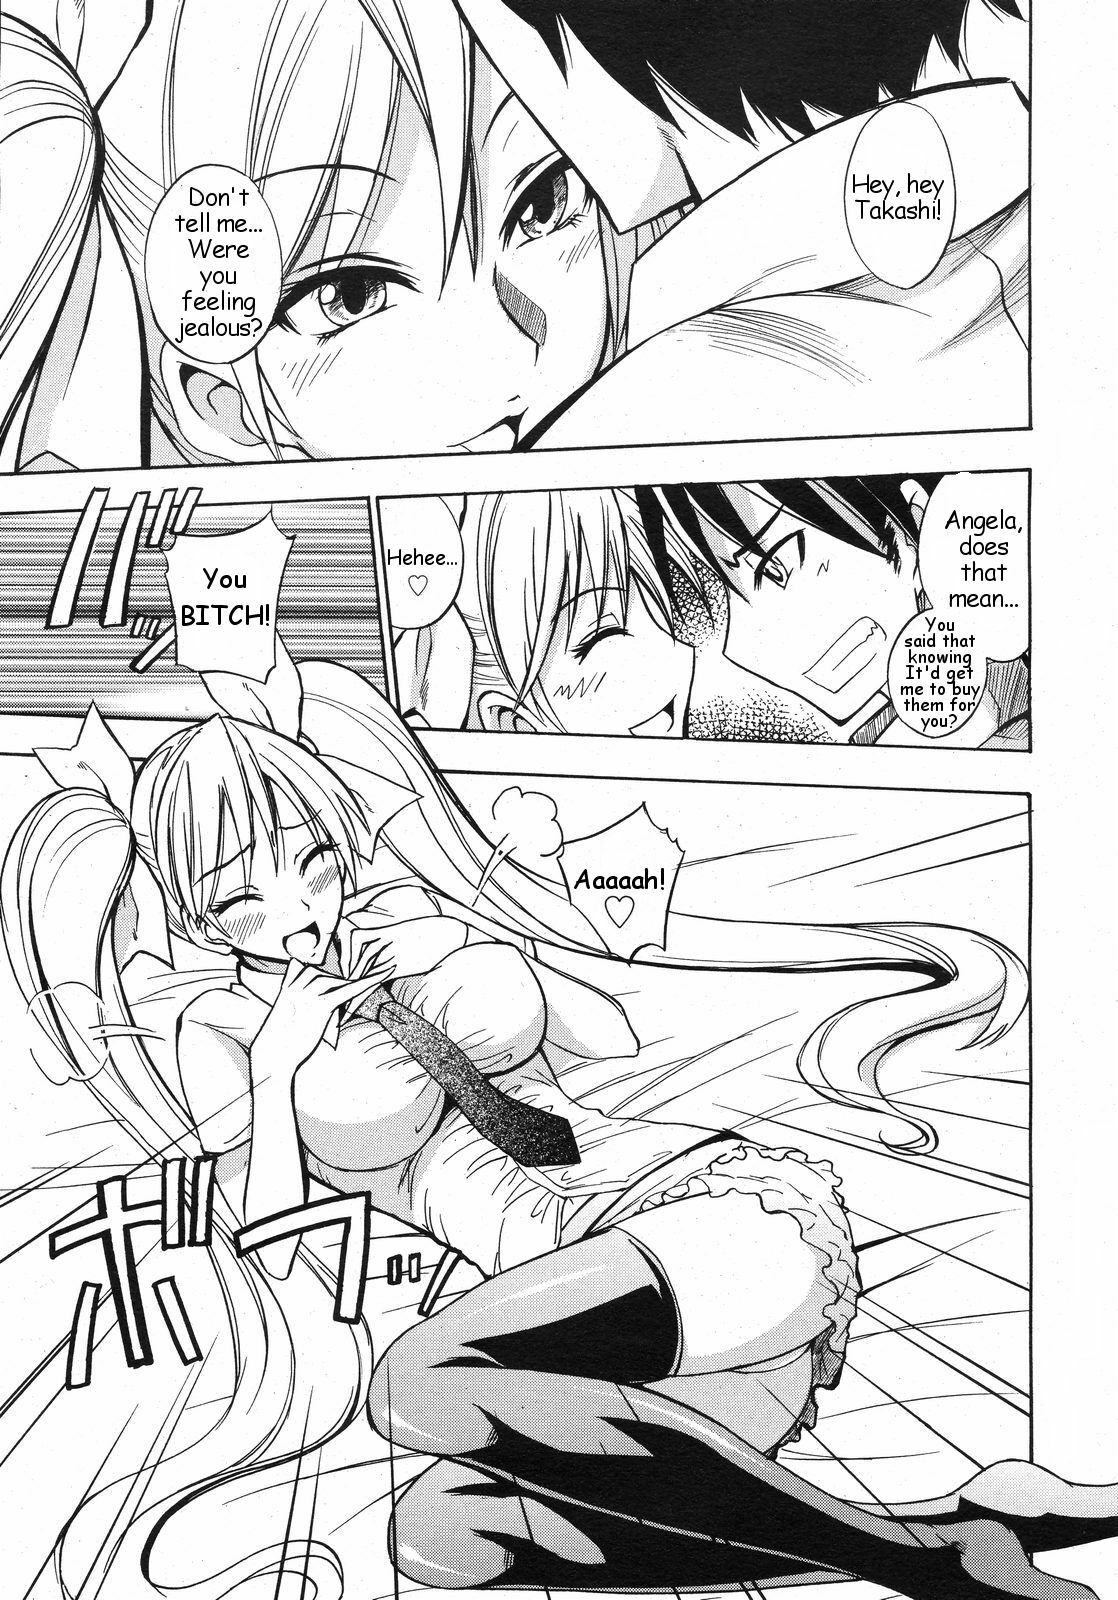 [Isao] Itazura Kami no Musume | Tricky Twintails Girl (COMIC 0EX Vol. 13 2009-01) [English] [Oronae] page 7 full